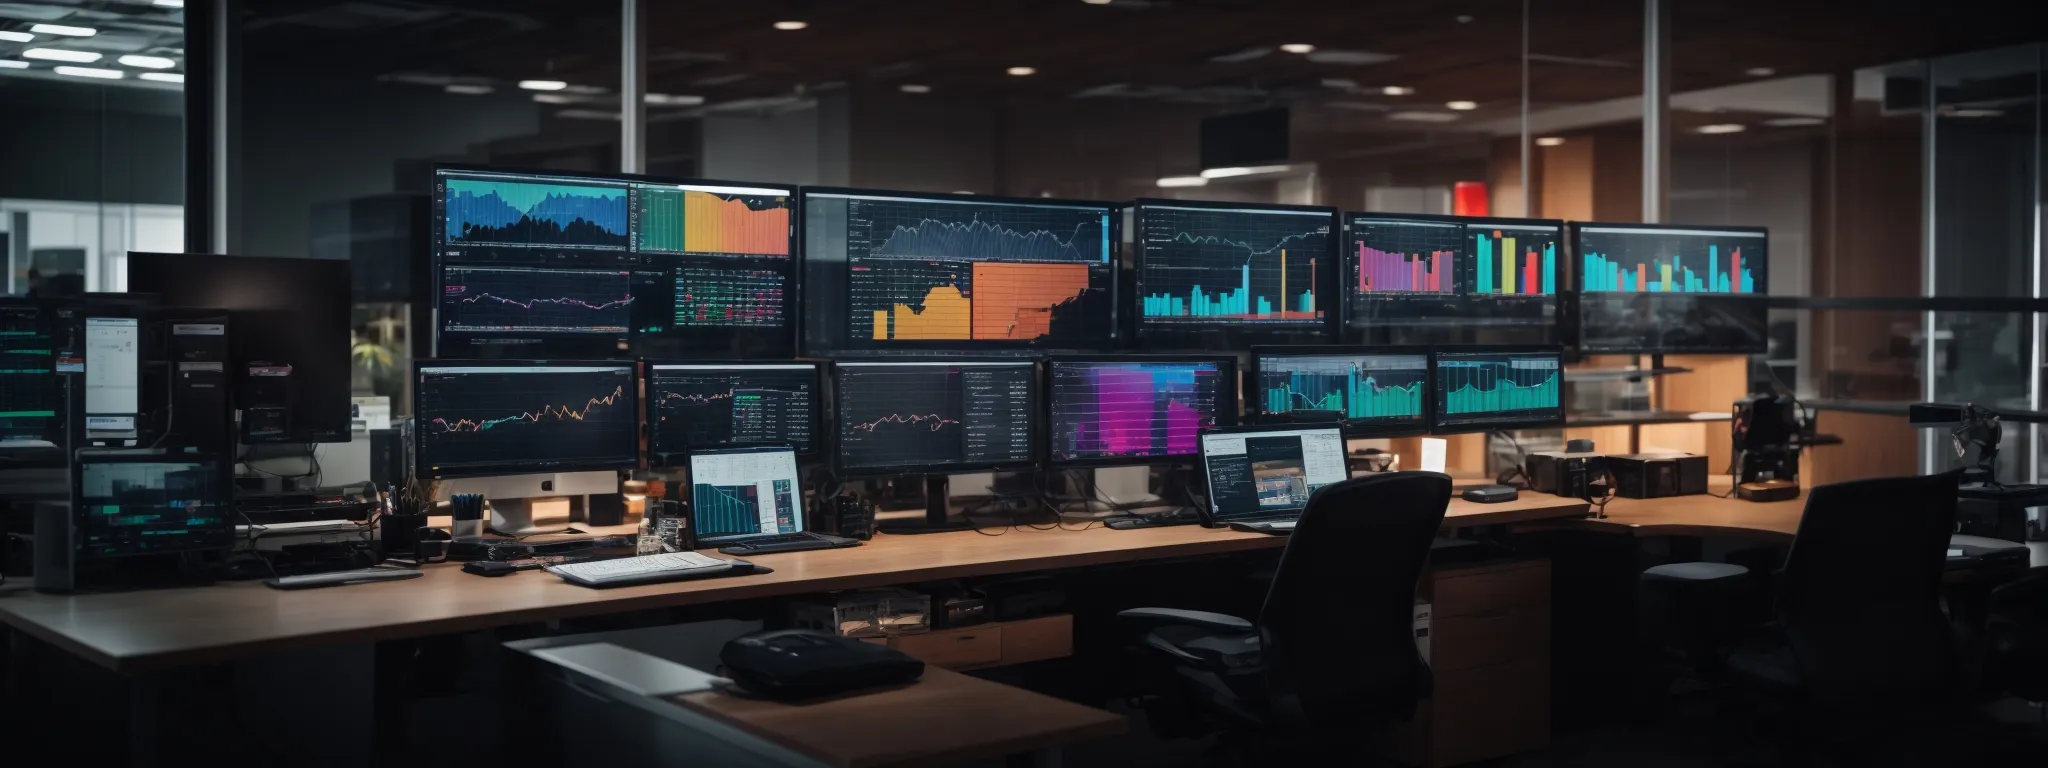 a modern office setup with multiple computer monitors displaying colorful data analytics dashboards.